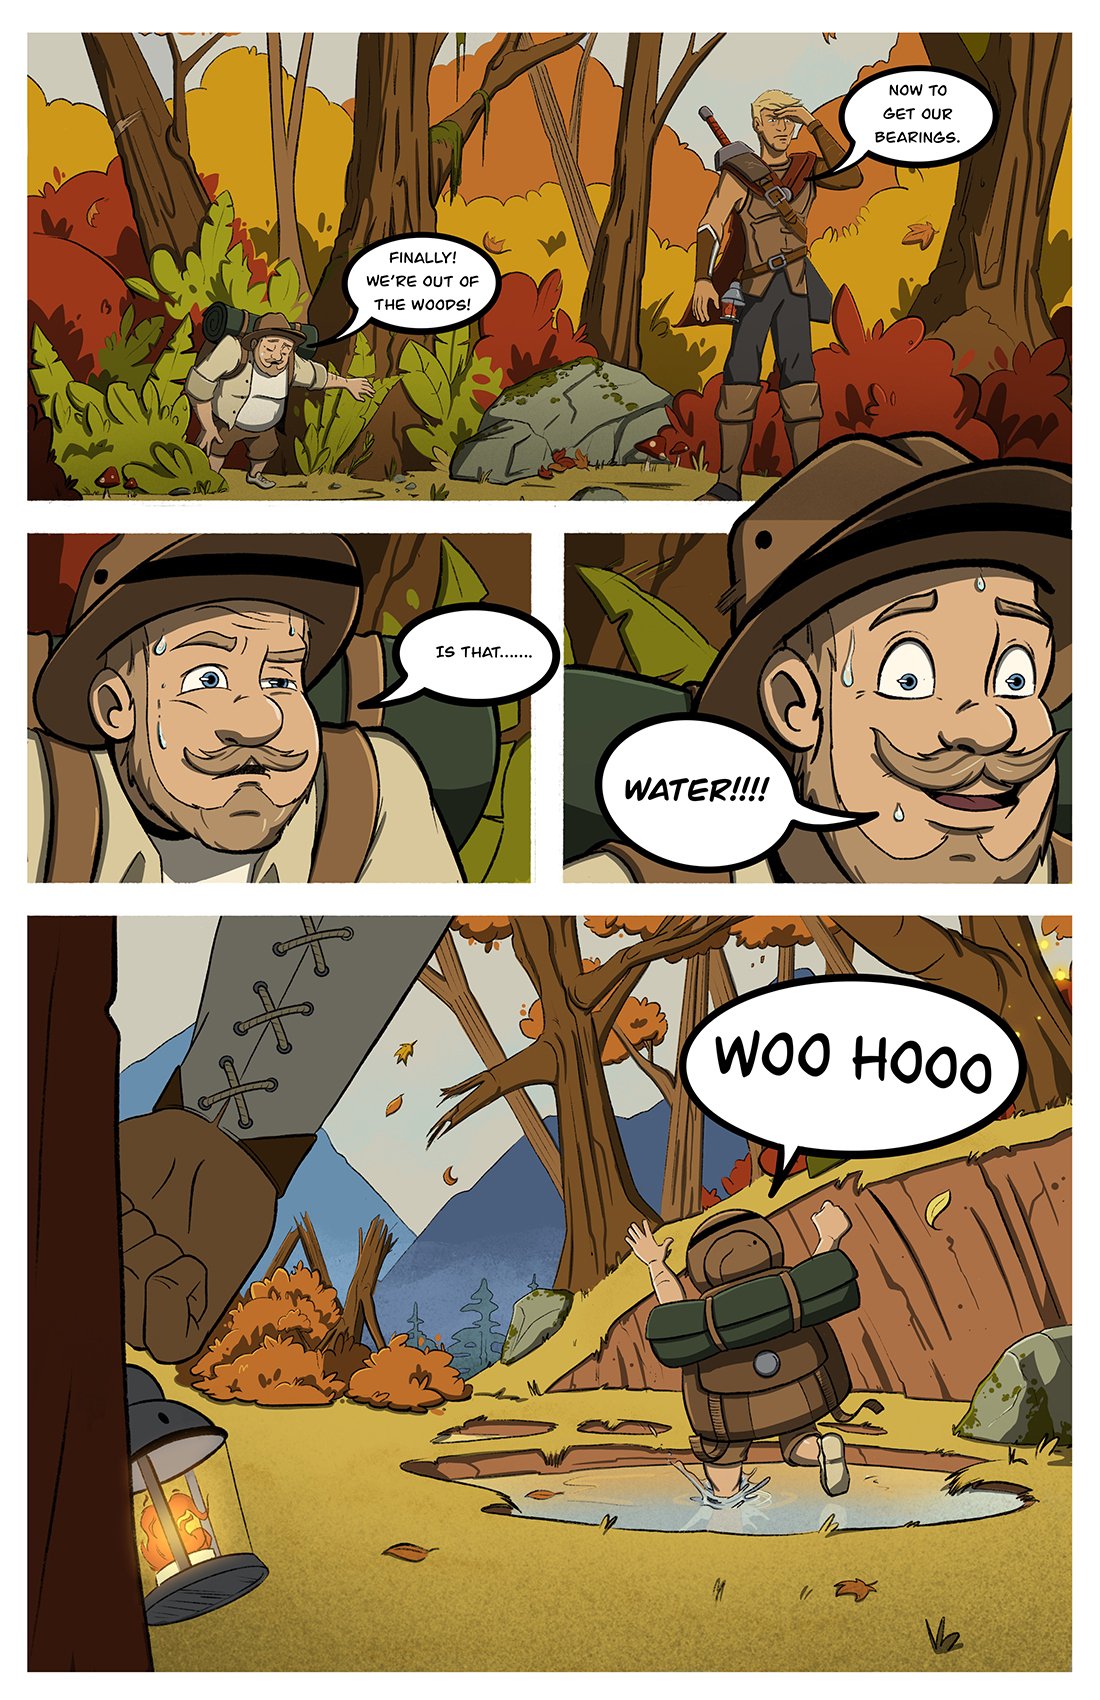 Out of the Woods PG1